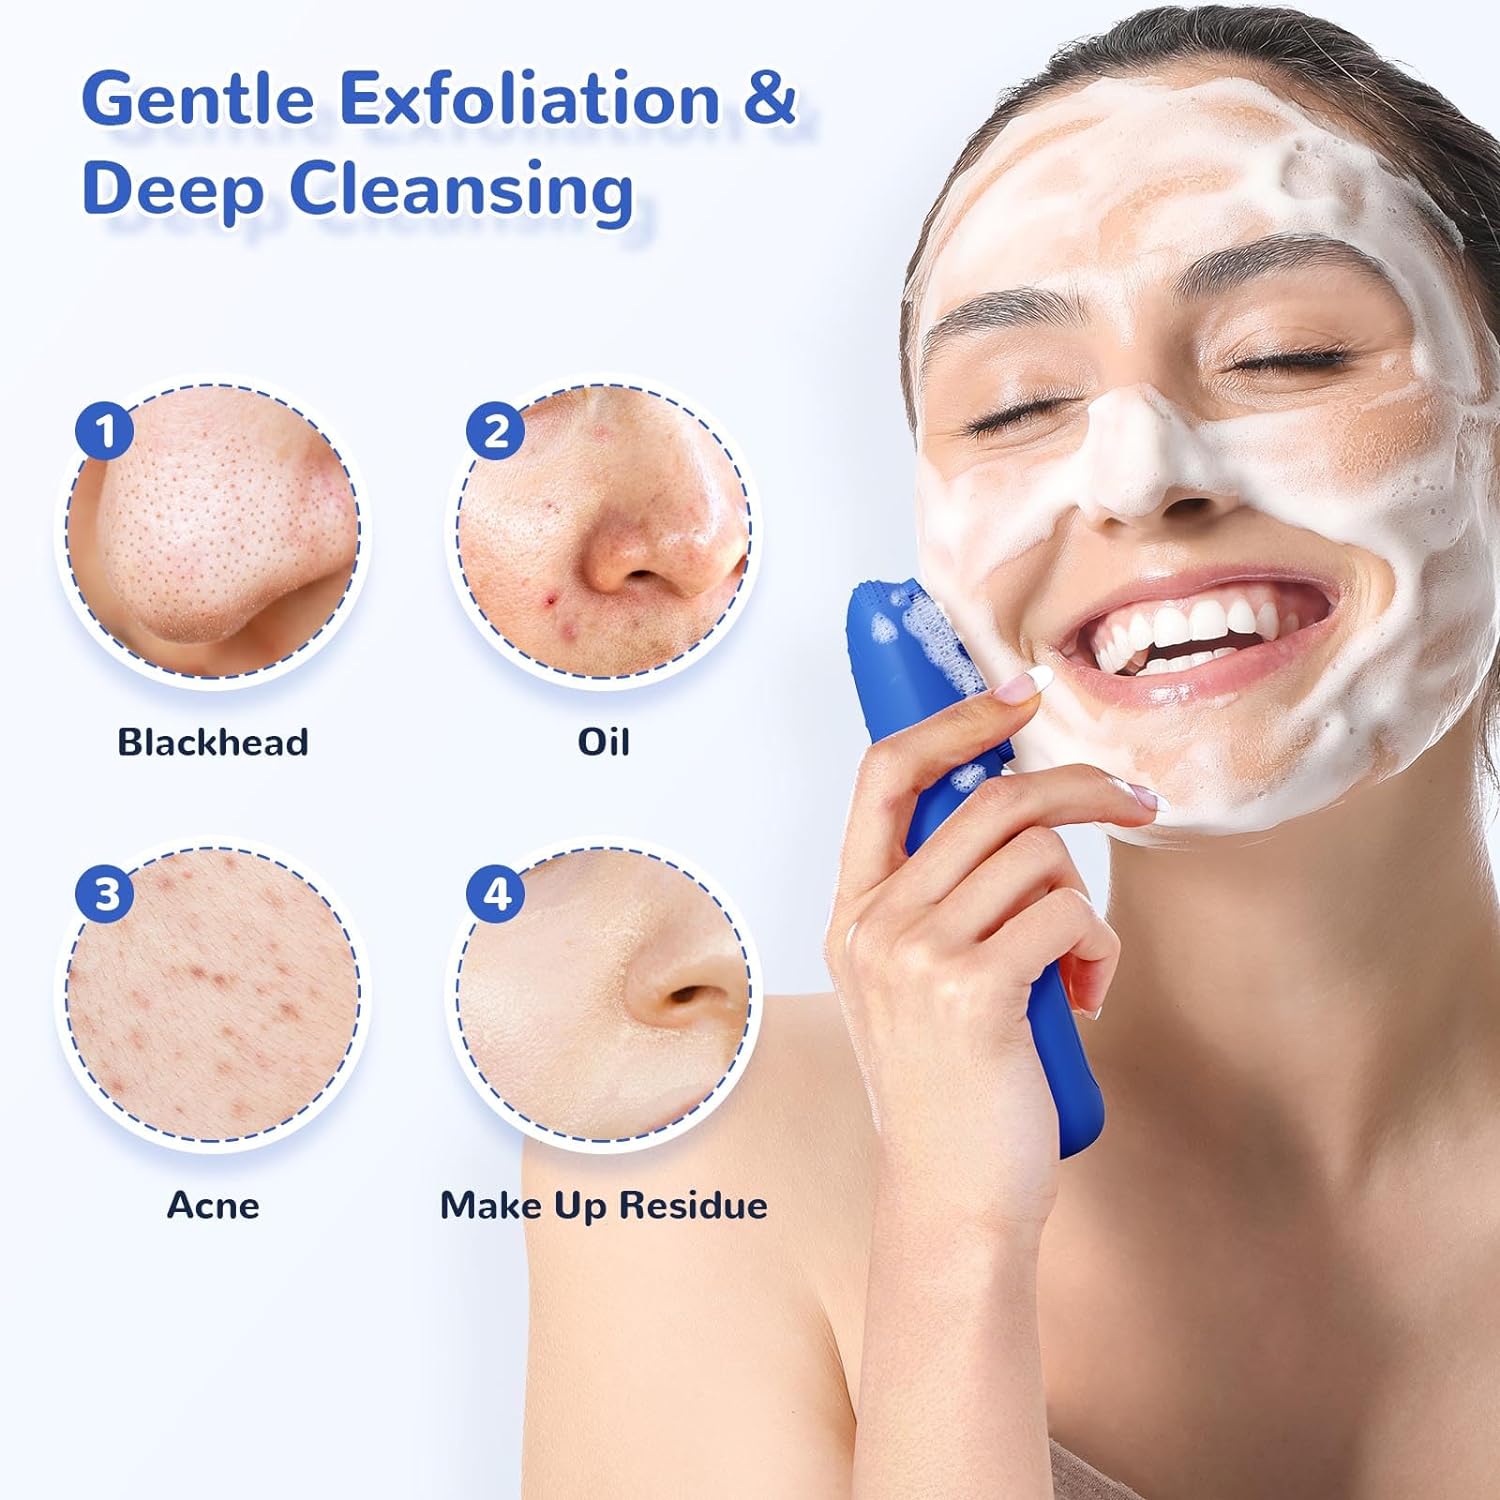 Sonic Face Cleansing Brush - CareYou Face Scrubber for Women, Rechargeable Silicone Face Brushes for Deep Cleansing and Exfoliating, 40 Days Long-Last, Heating Mode, IPX7 Waterproof - Deep Blue